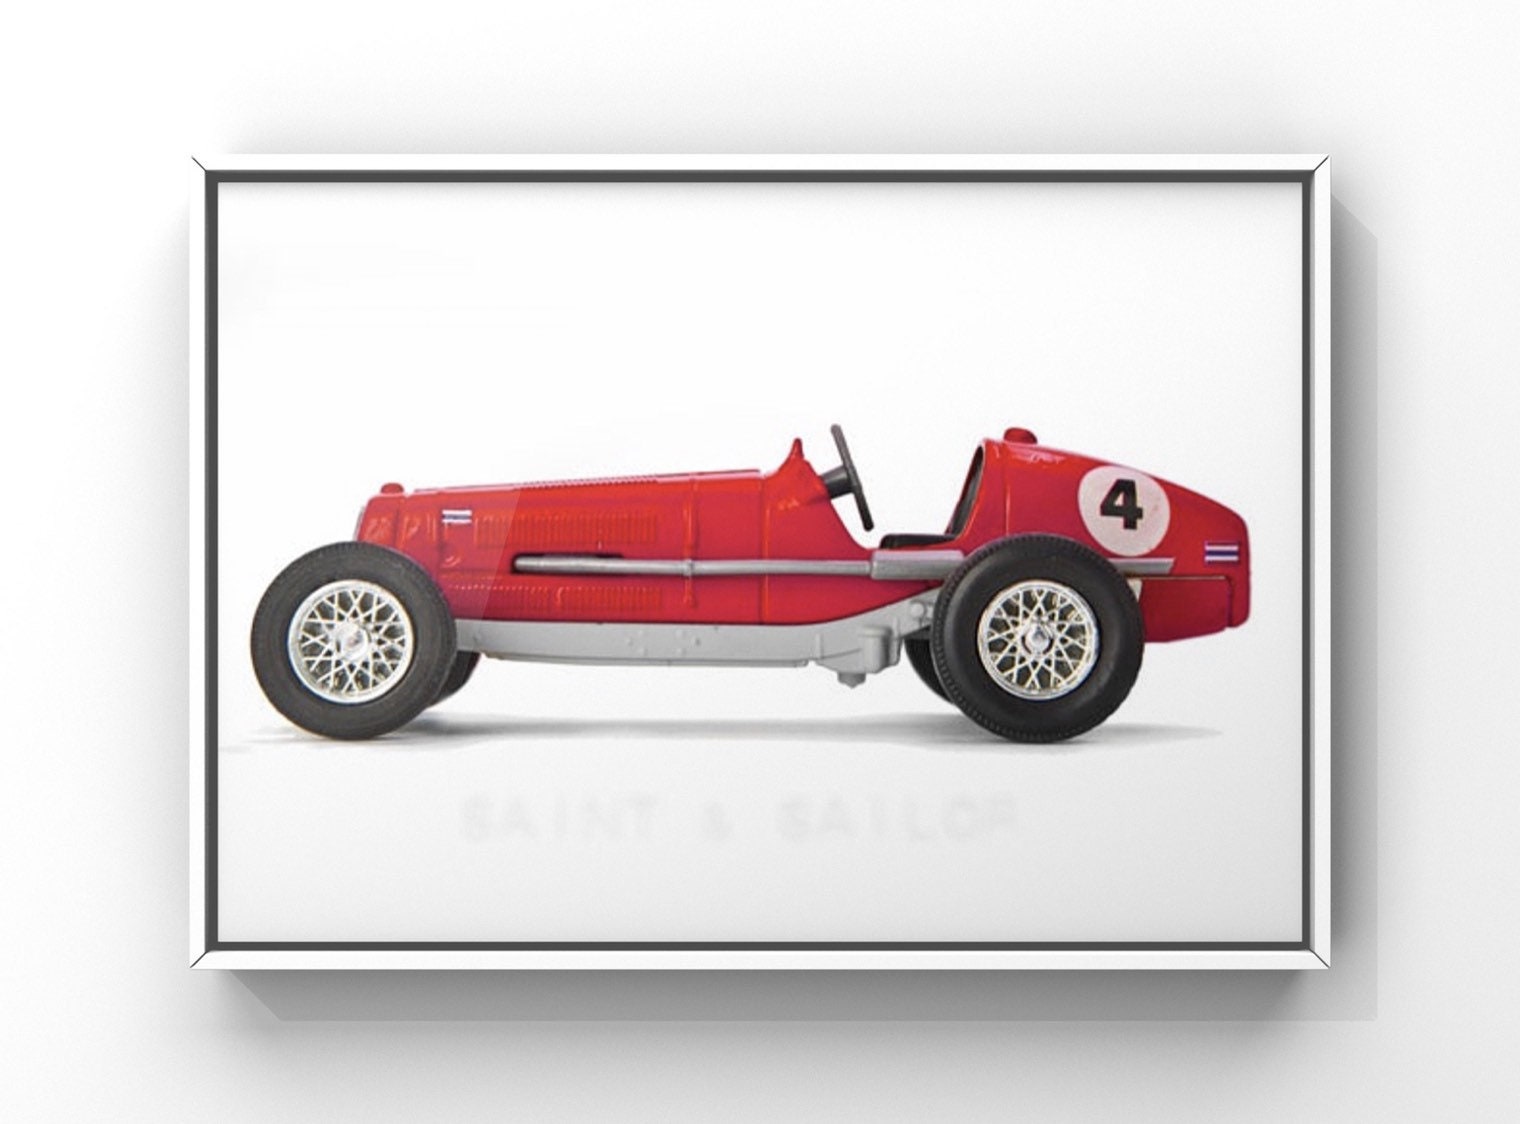 Red No.4 Vintage Race Car on White Background One Photo | Etsy